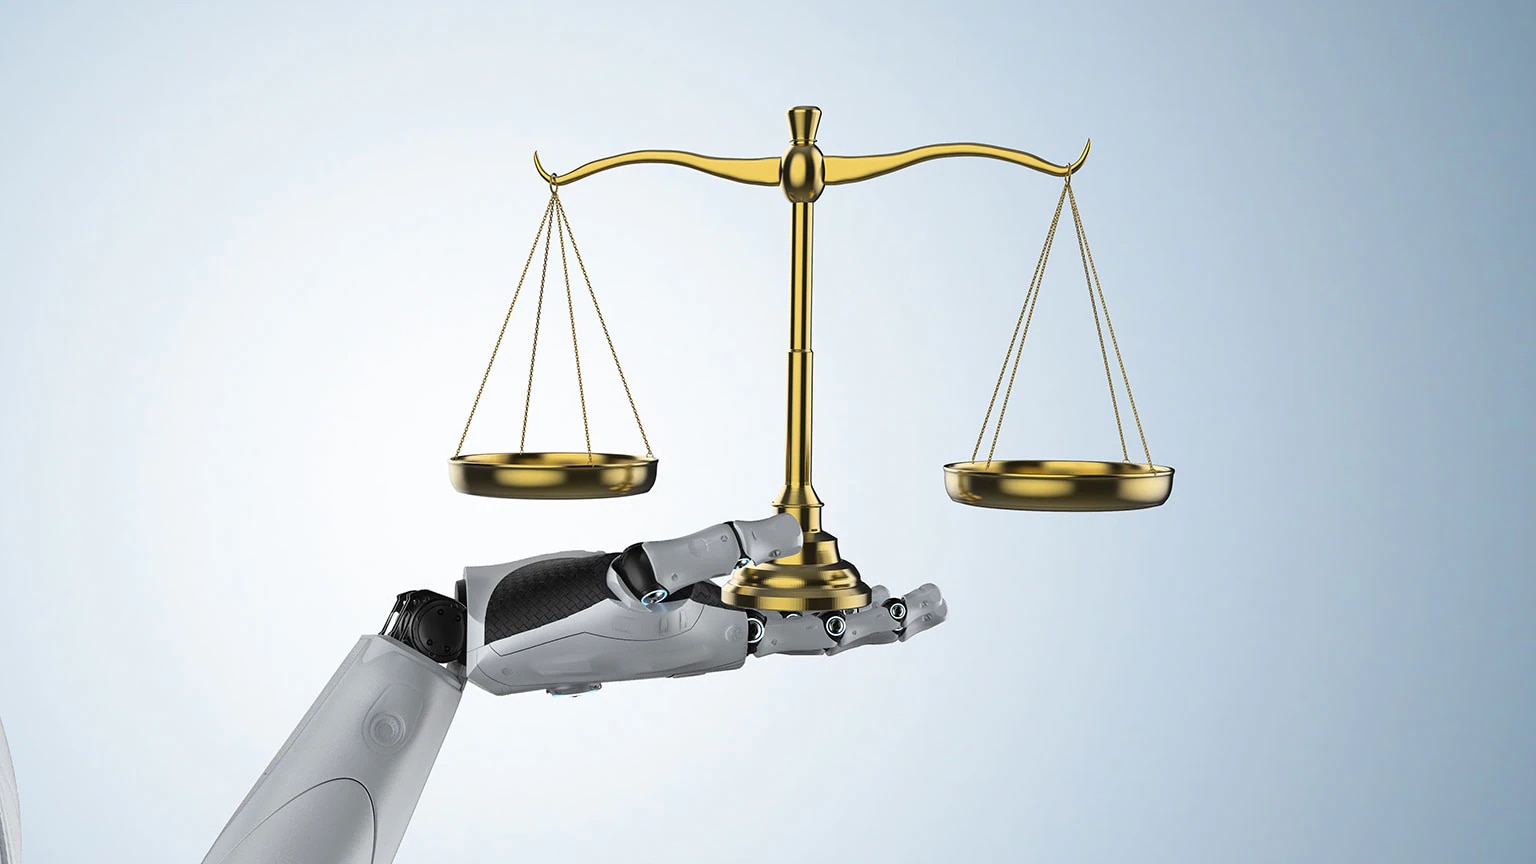 An image linking to the web page “Legal innovation and generative AI: Lawyers emerging as ‘pilots,’ content creators, and legal designers” on McKinsey.com.